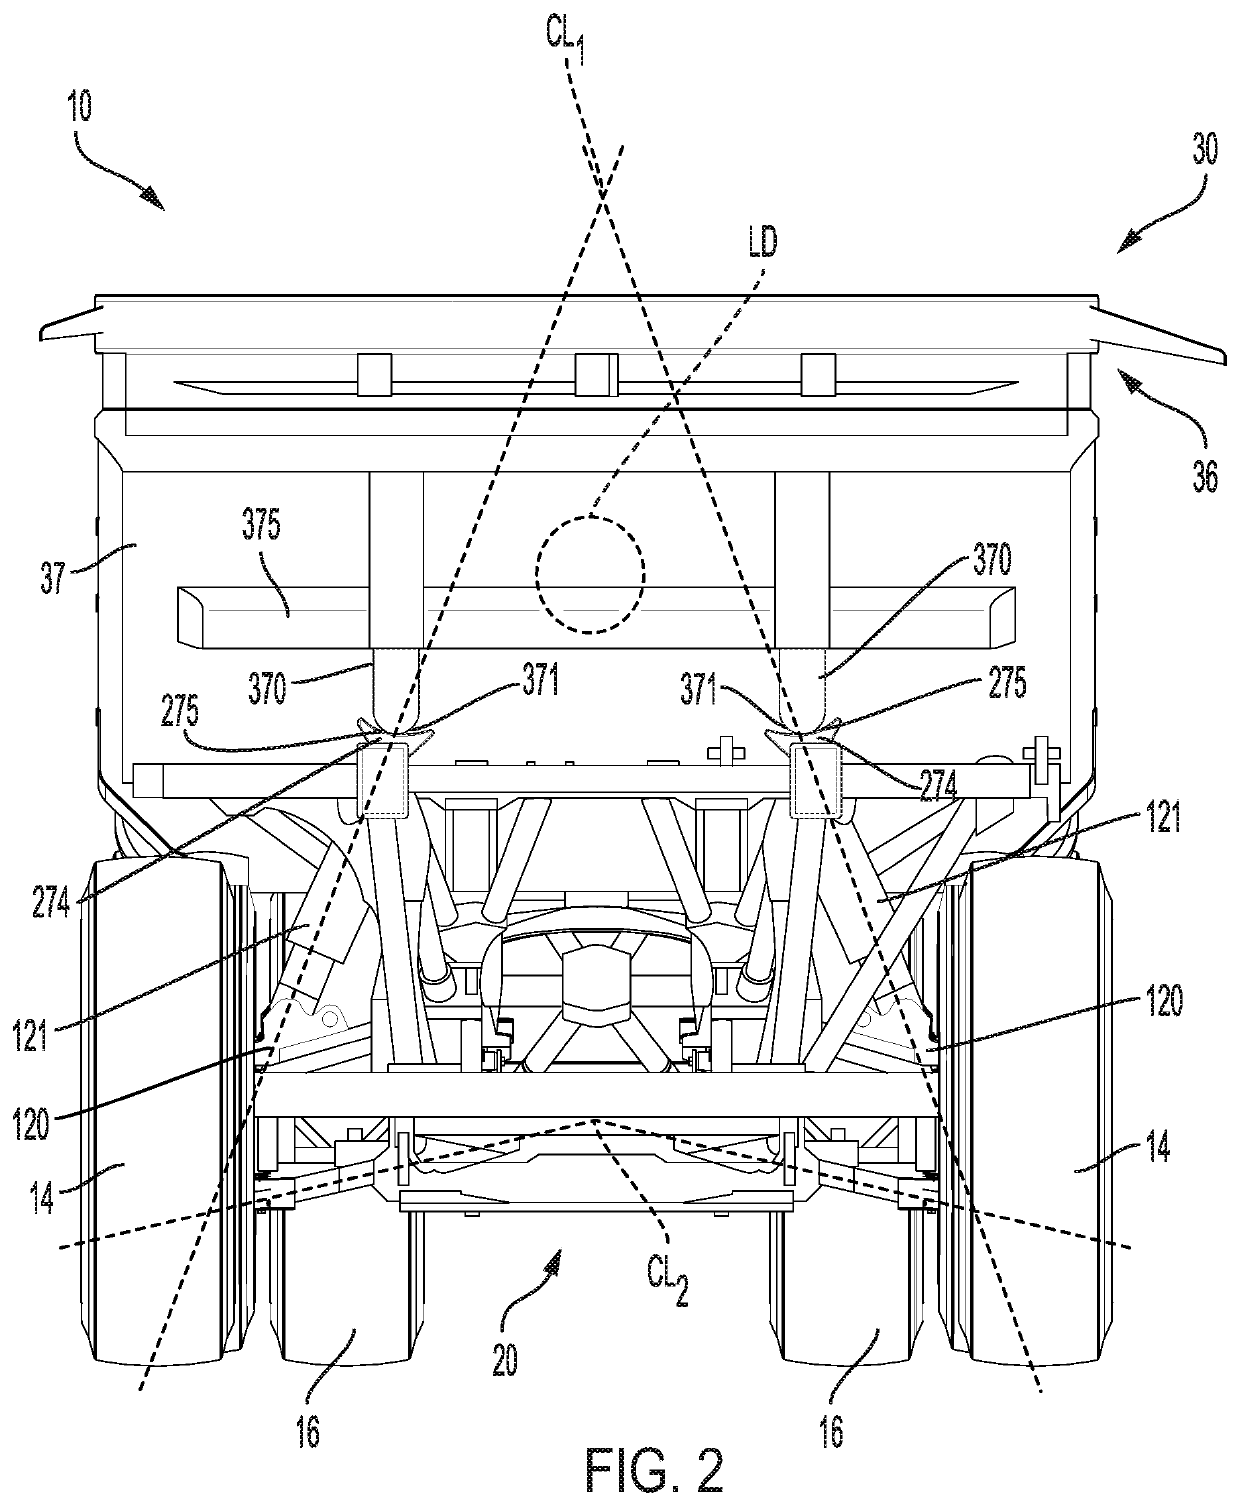 Space frame dump body pivot, suspension node, and rear frame connection